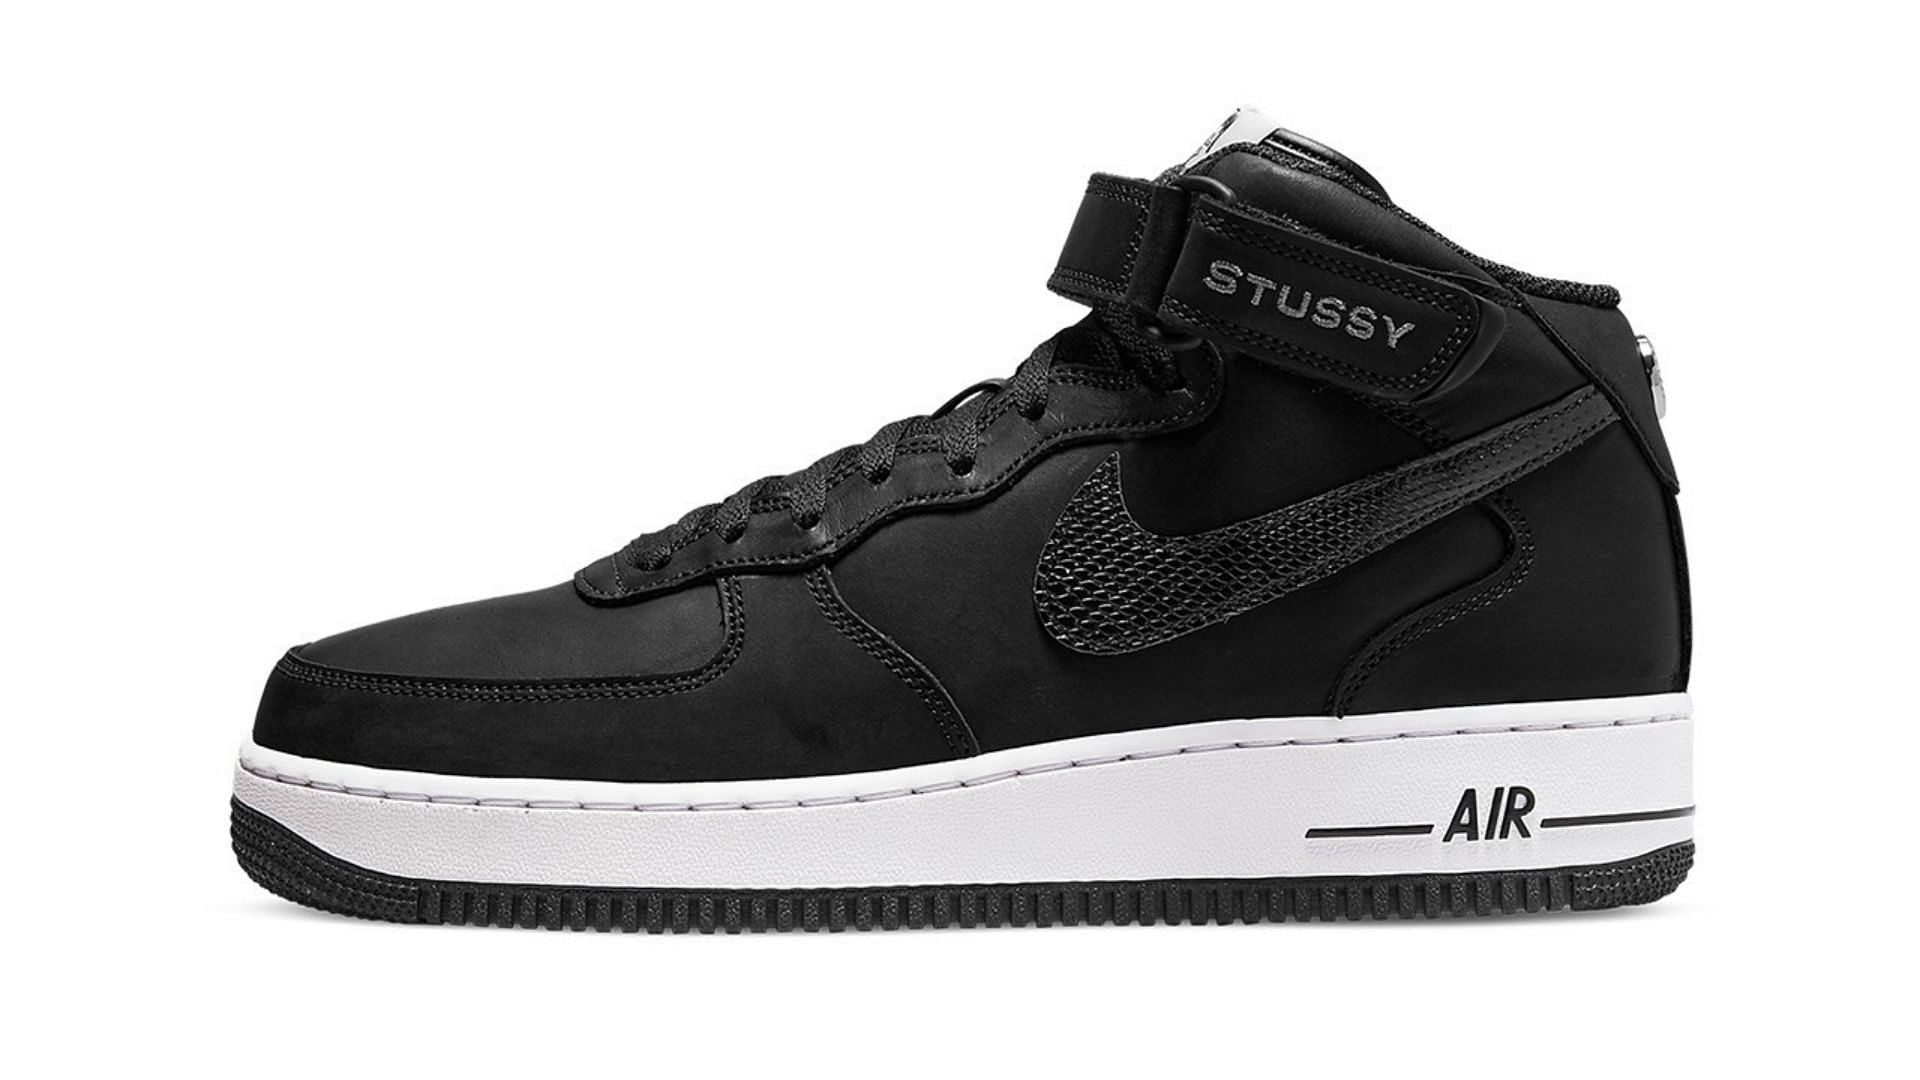 Stussy X Nike Air Force 1 Mid Black: Where to buy, price and more 